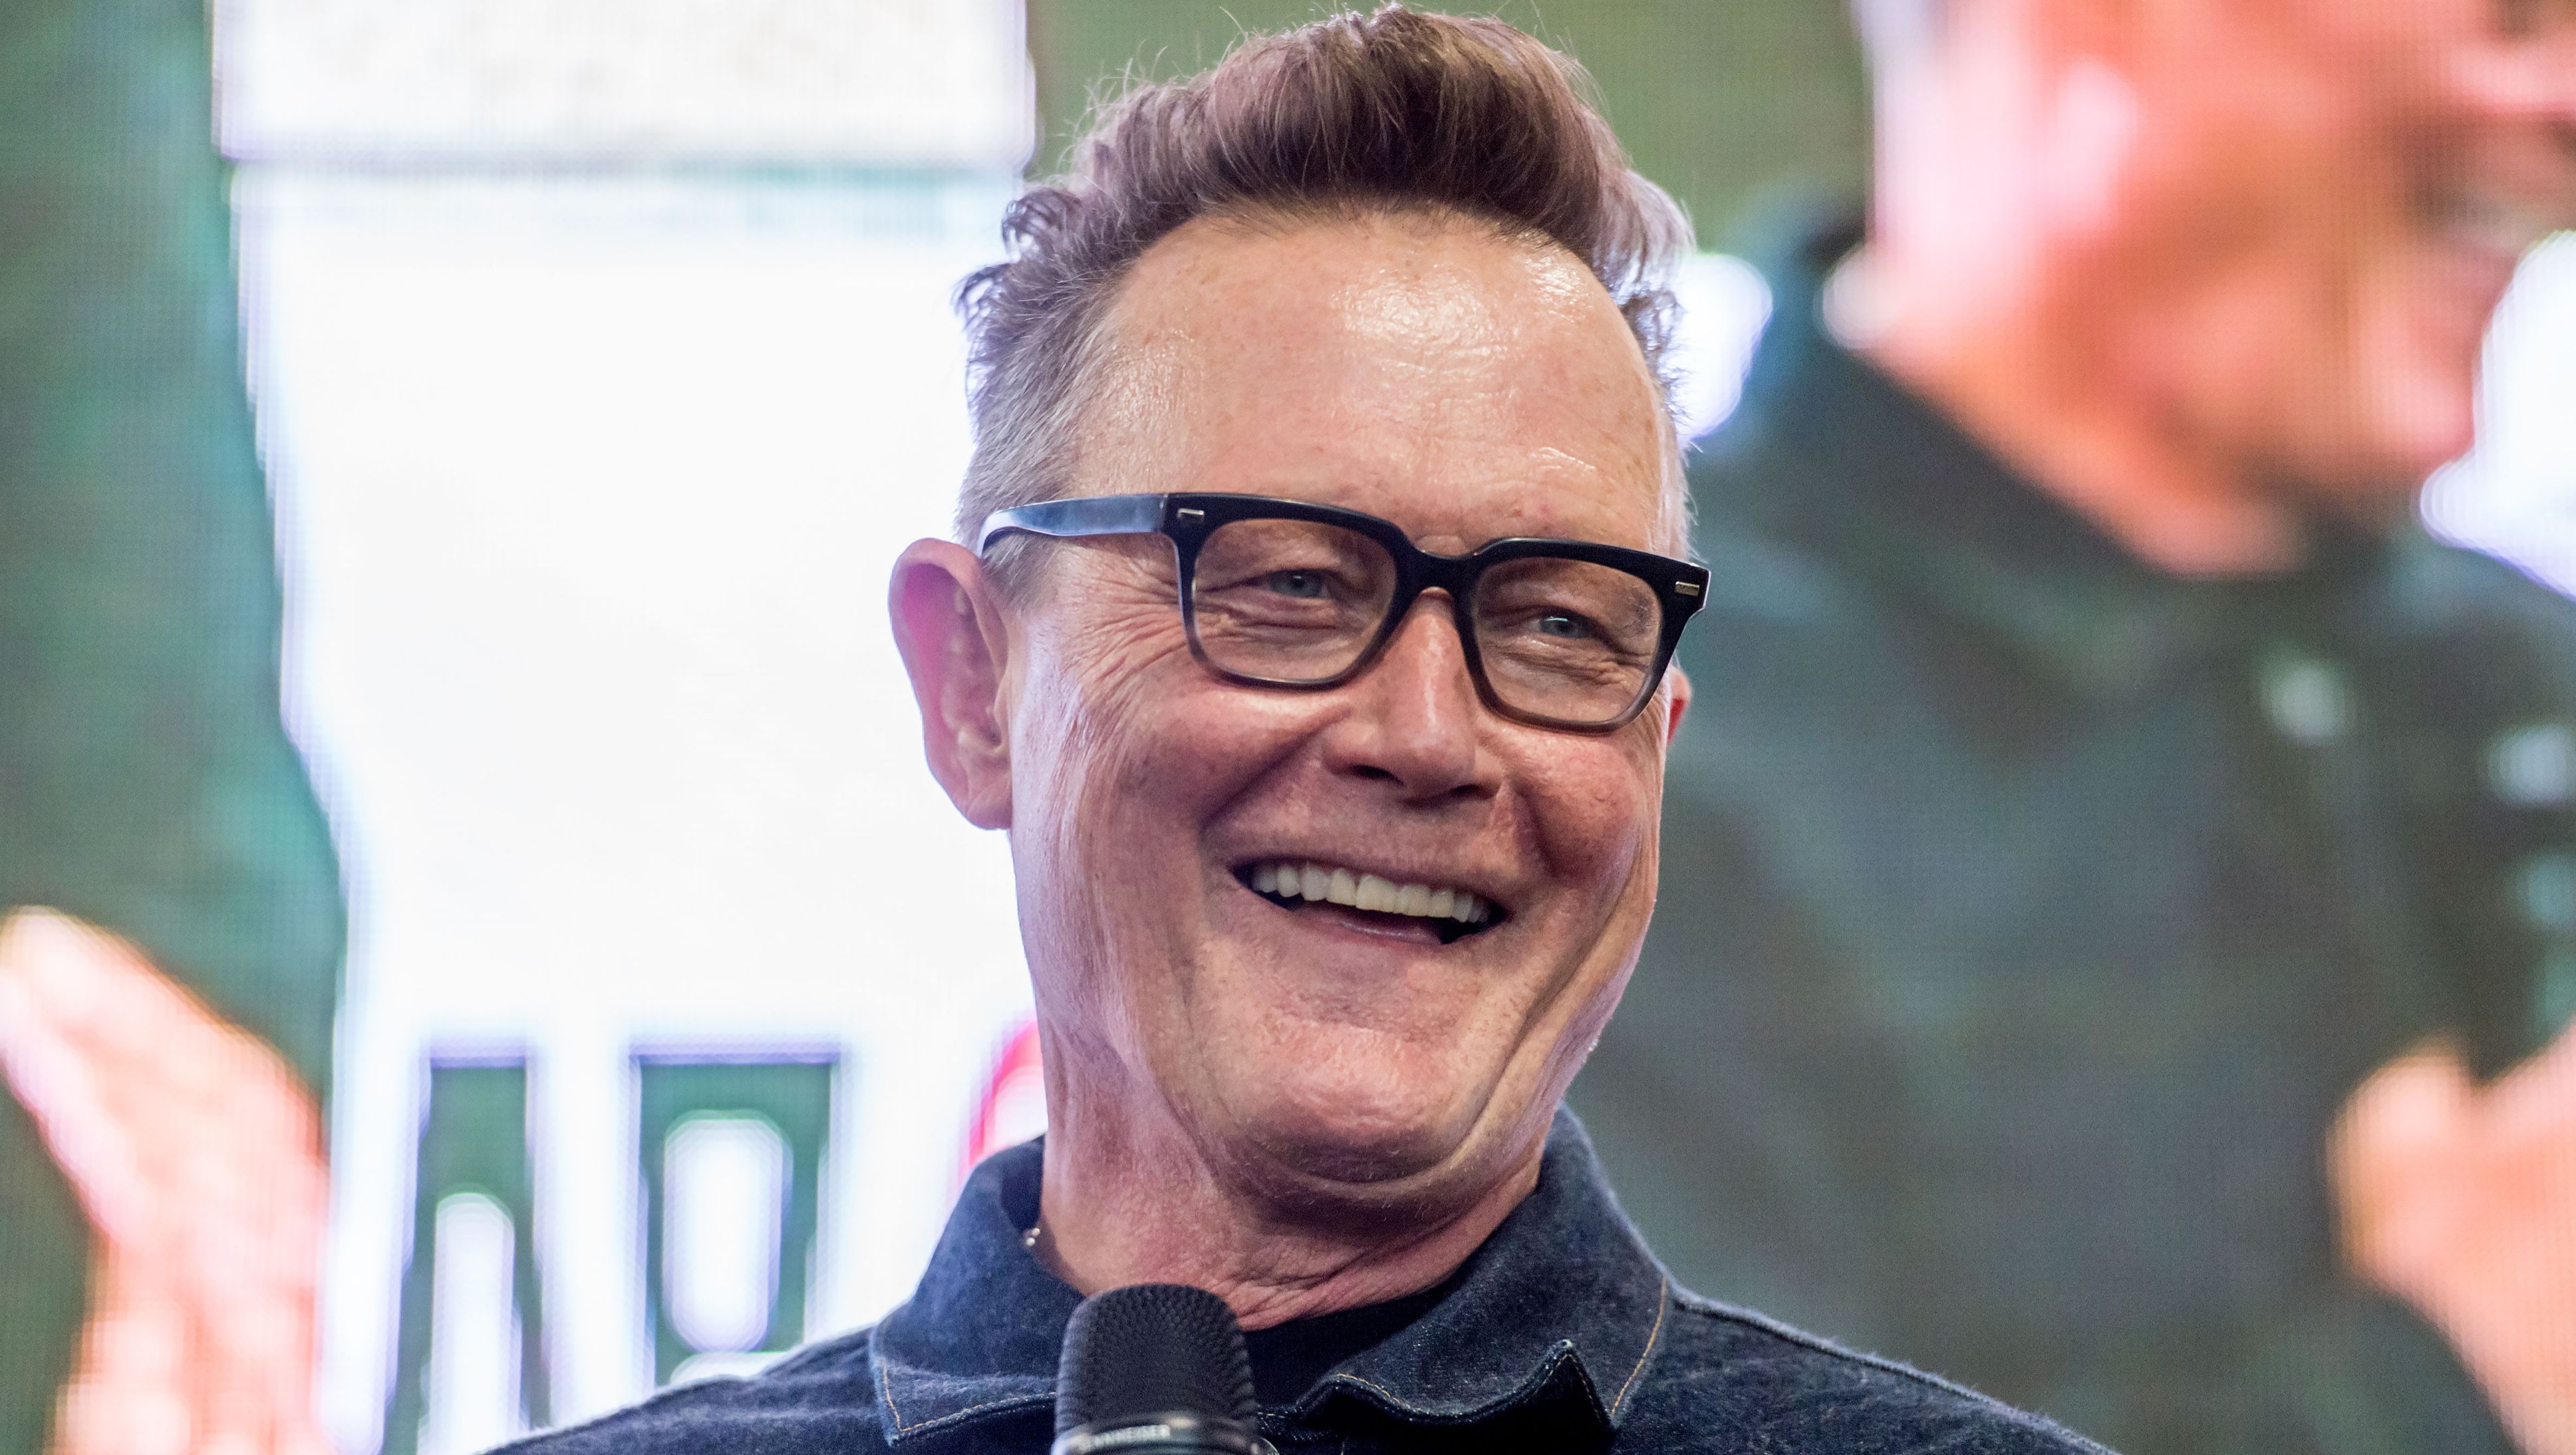 Robert Patrick smiles in glasses and a collared shirt.